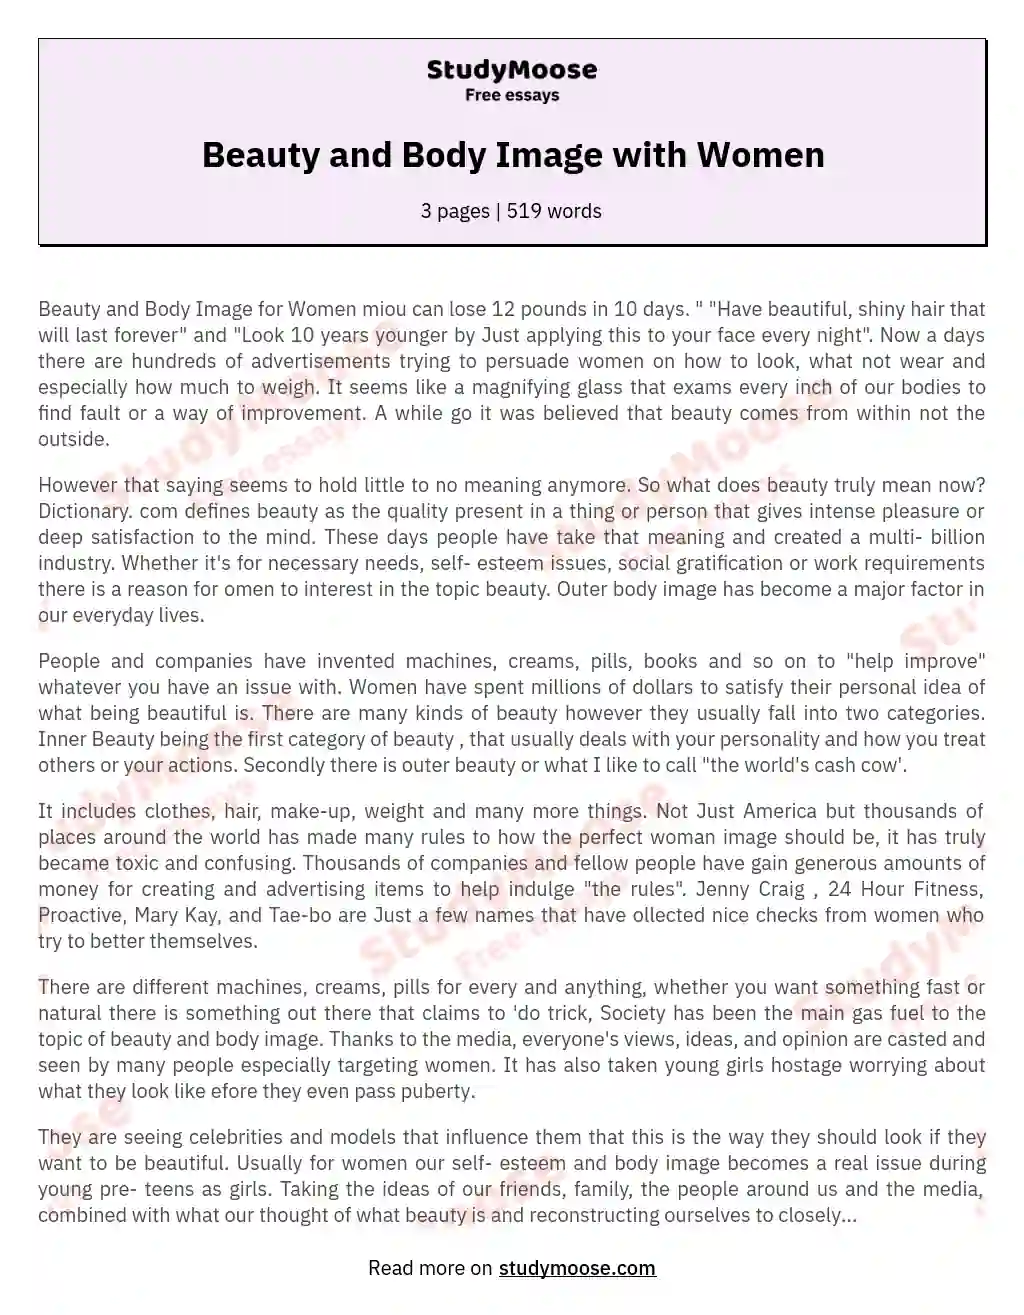 research paper on female beauty